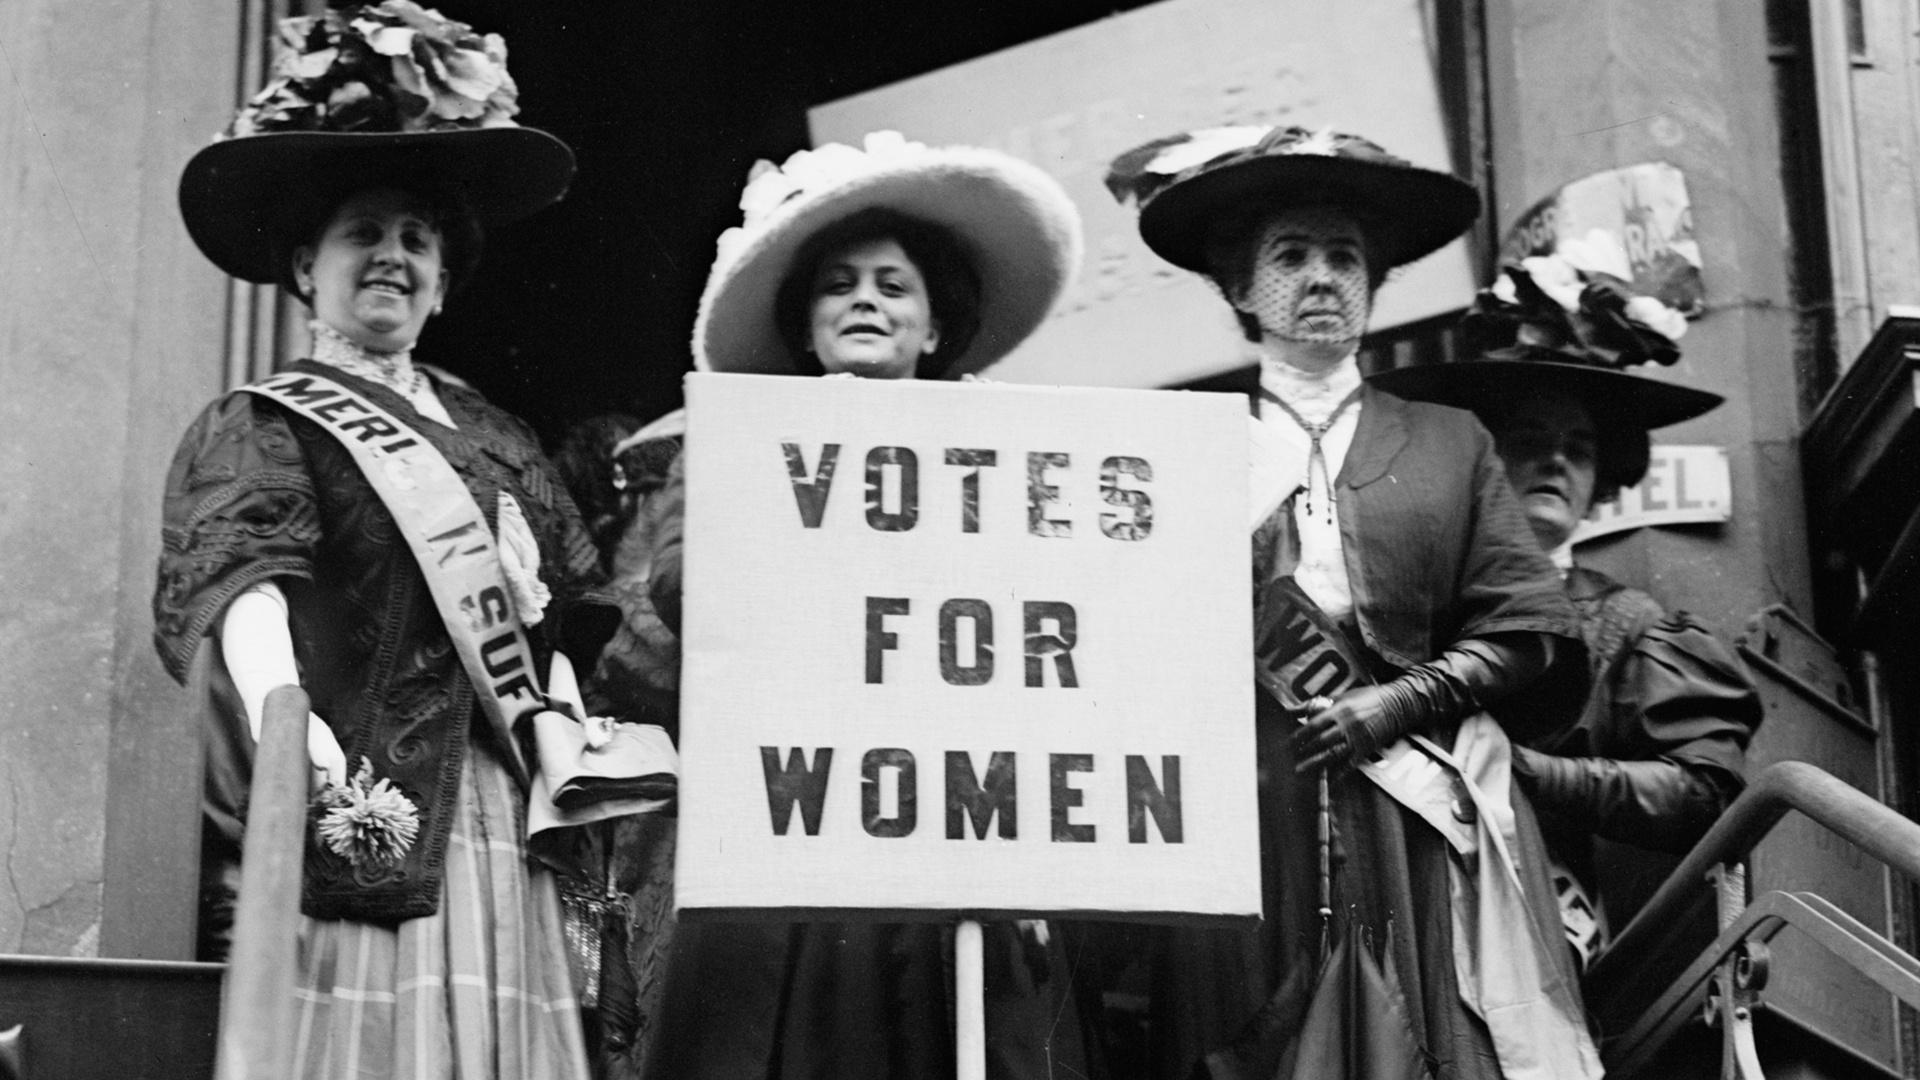 Trixie Friganza between suffrage leaders [New York]